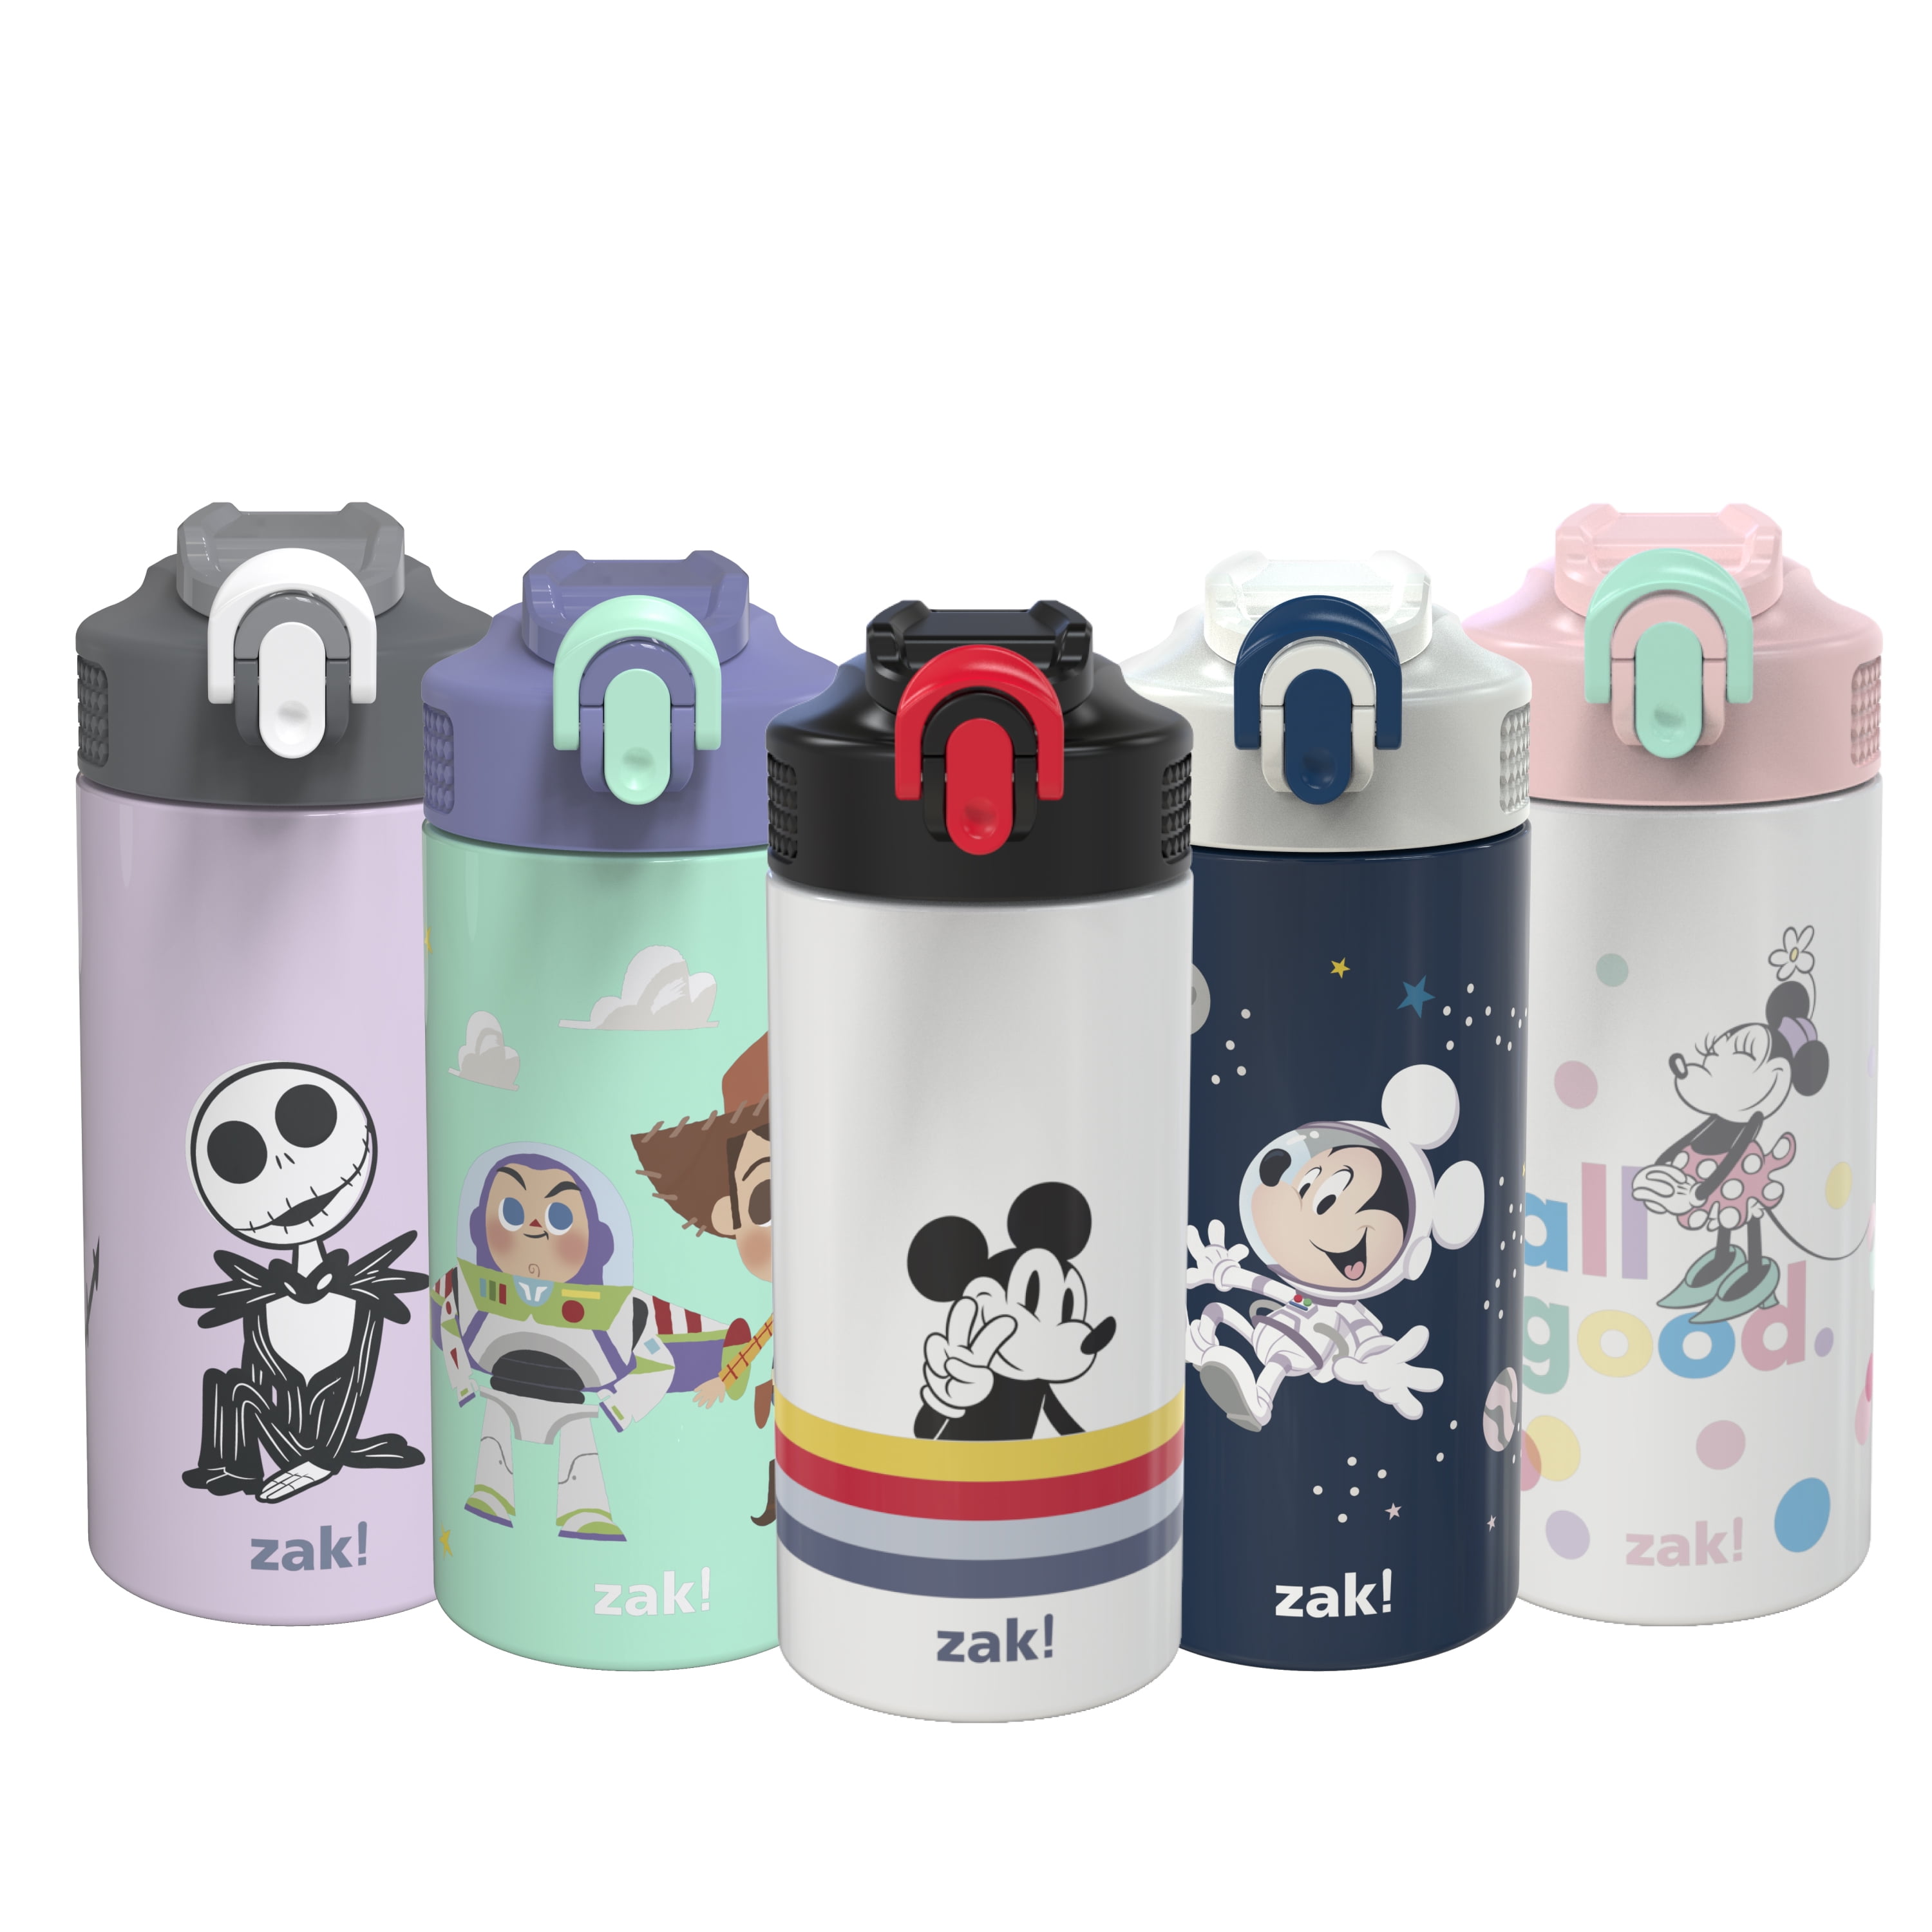 Peanuts 2 Pk Stainless Steal Water Bottle 25 Oz. Assorted Designs 